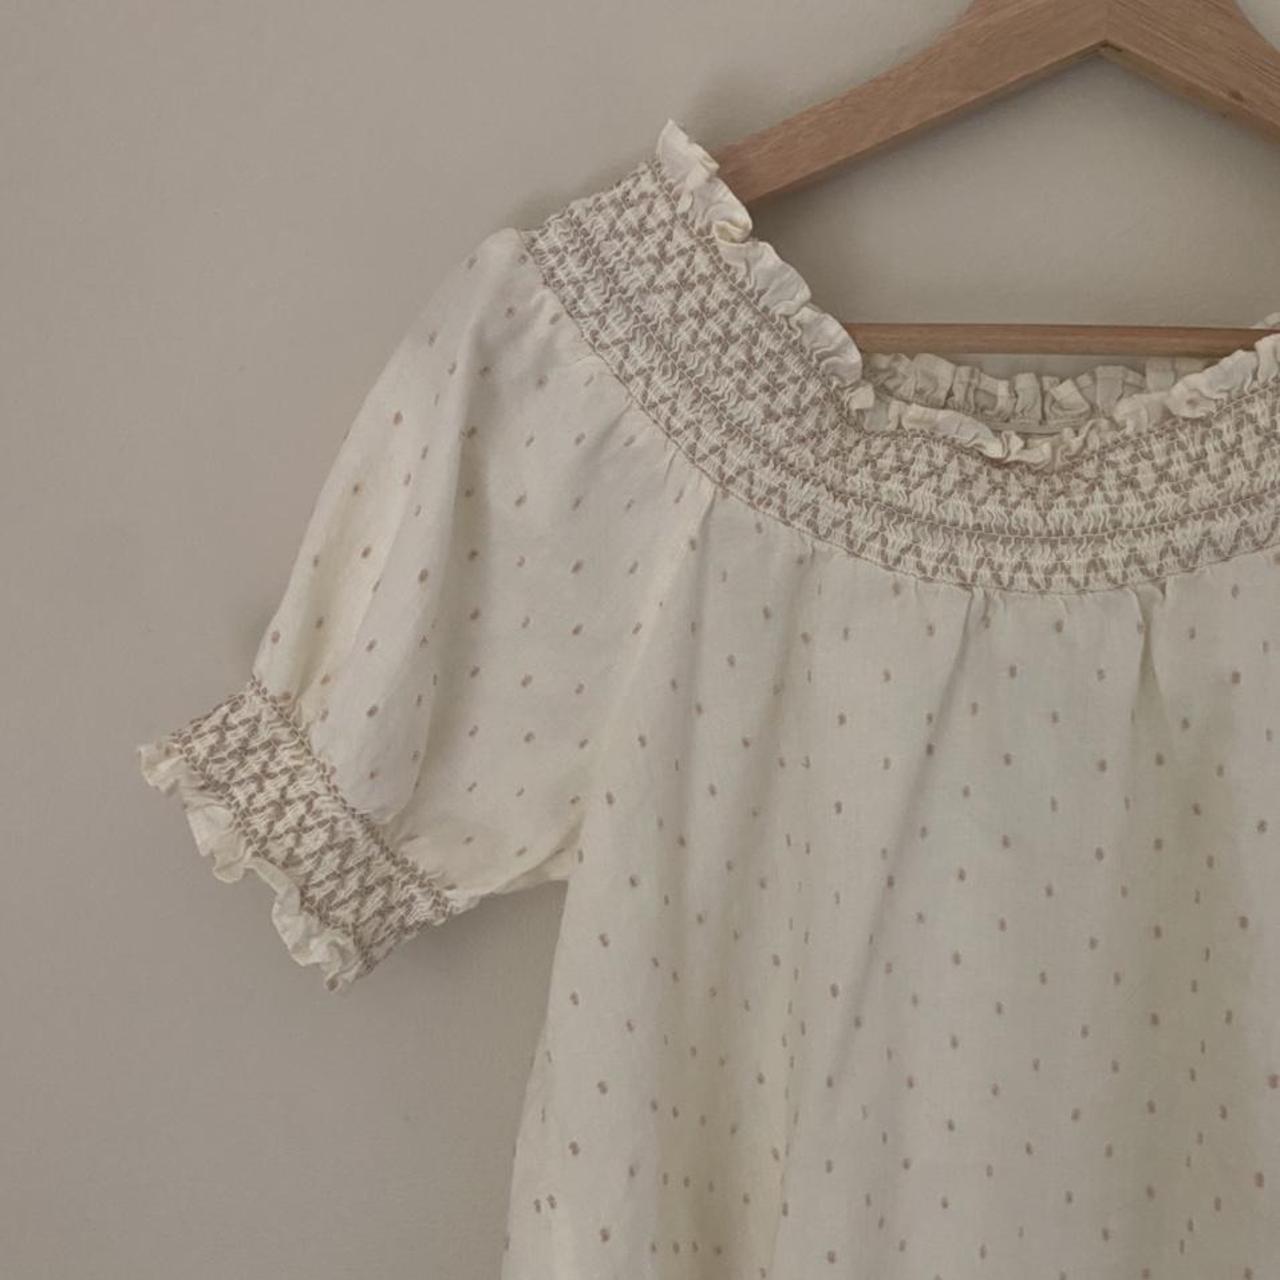 Product Image 3 - Doen-inspired top from Adored Vintage